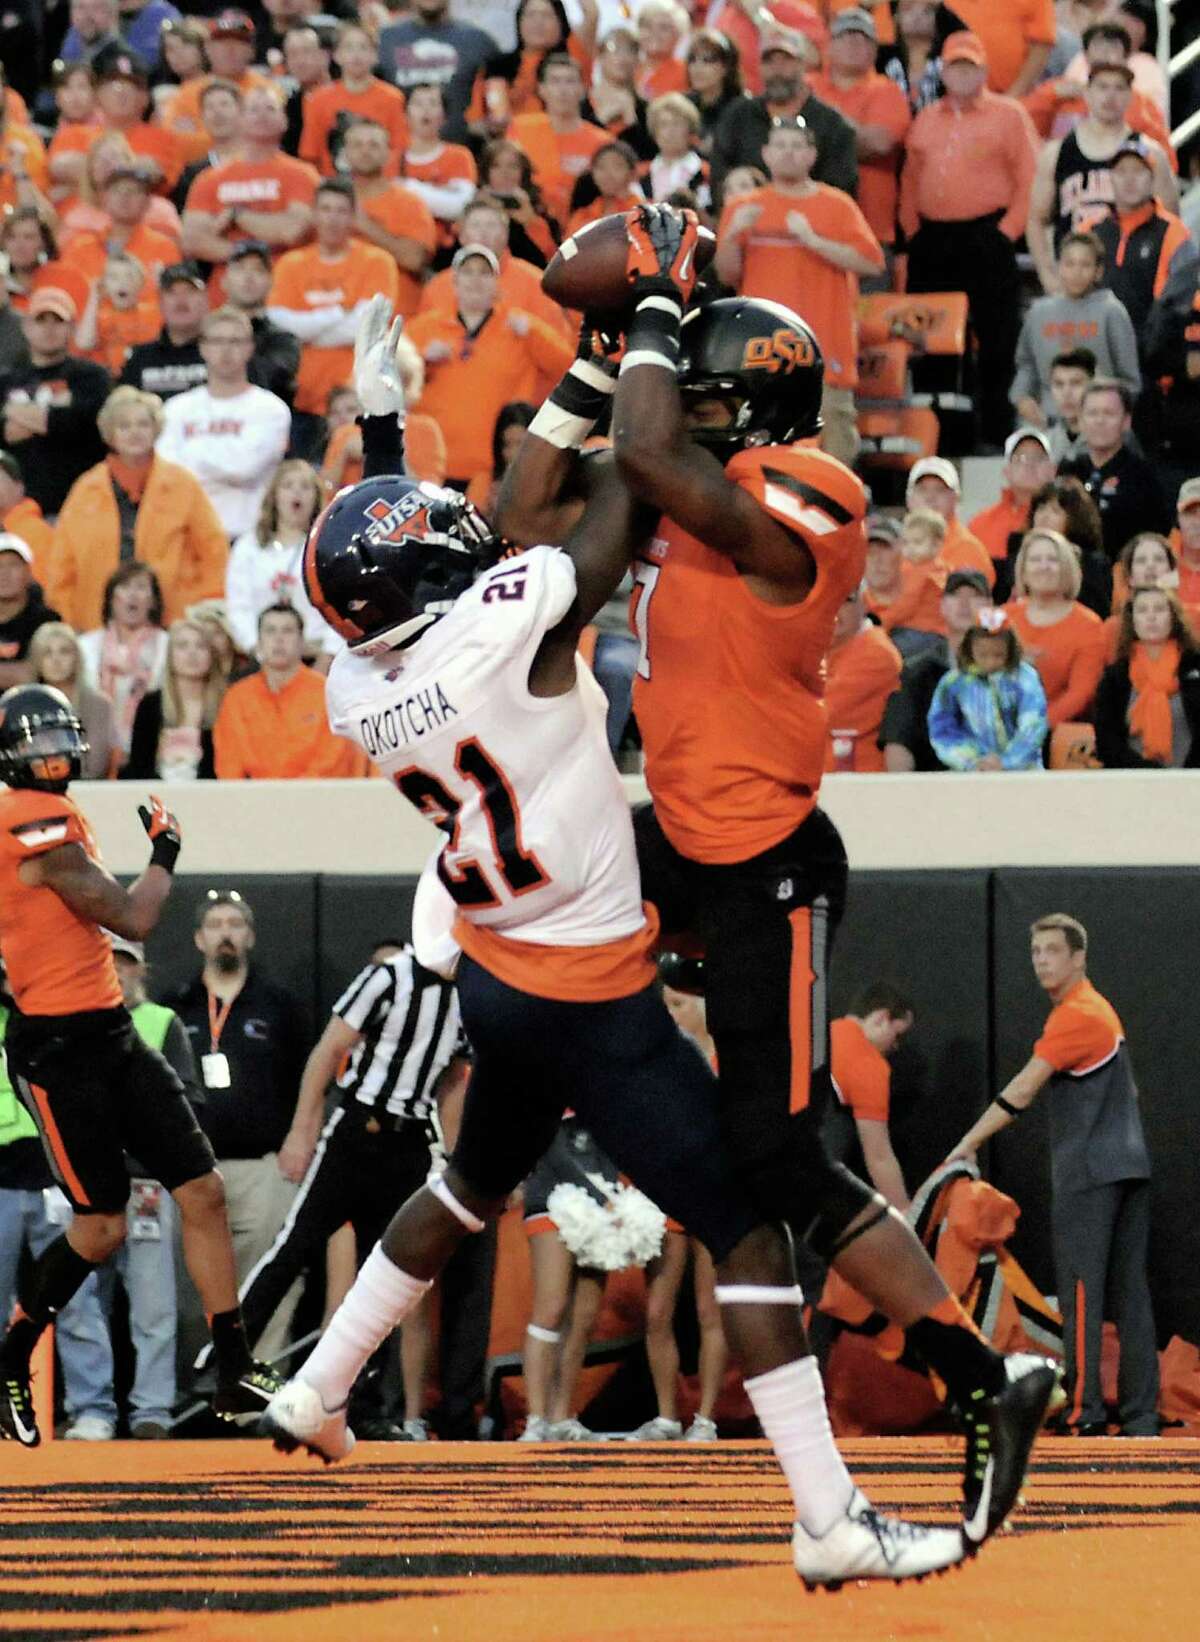 Oklahoma State wide receiver Brandon Sheperd catches a touchdown pass over UTSA cornerback Bennett Okotcha in the first half Saturday of the Cowboys' victory in Stillwater, Okla.